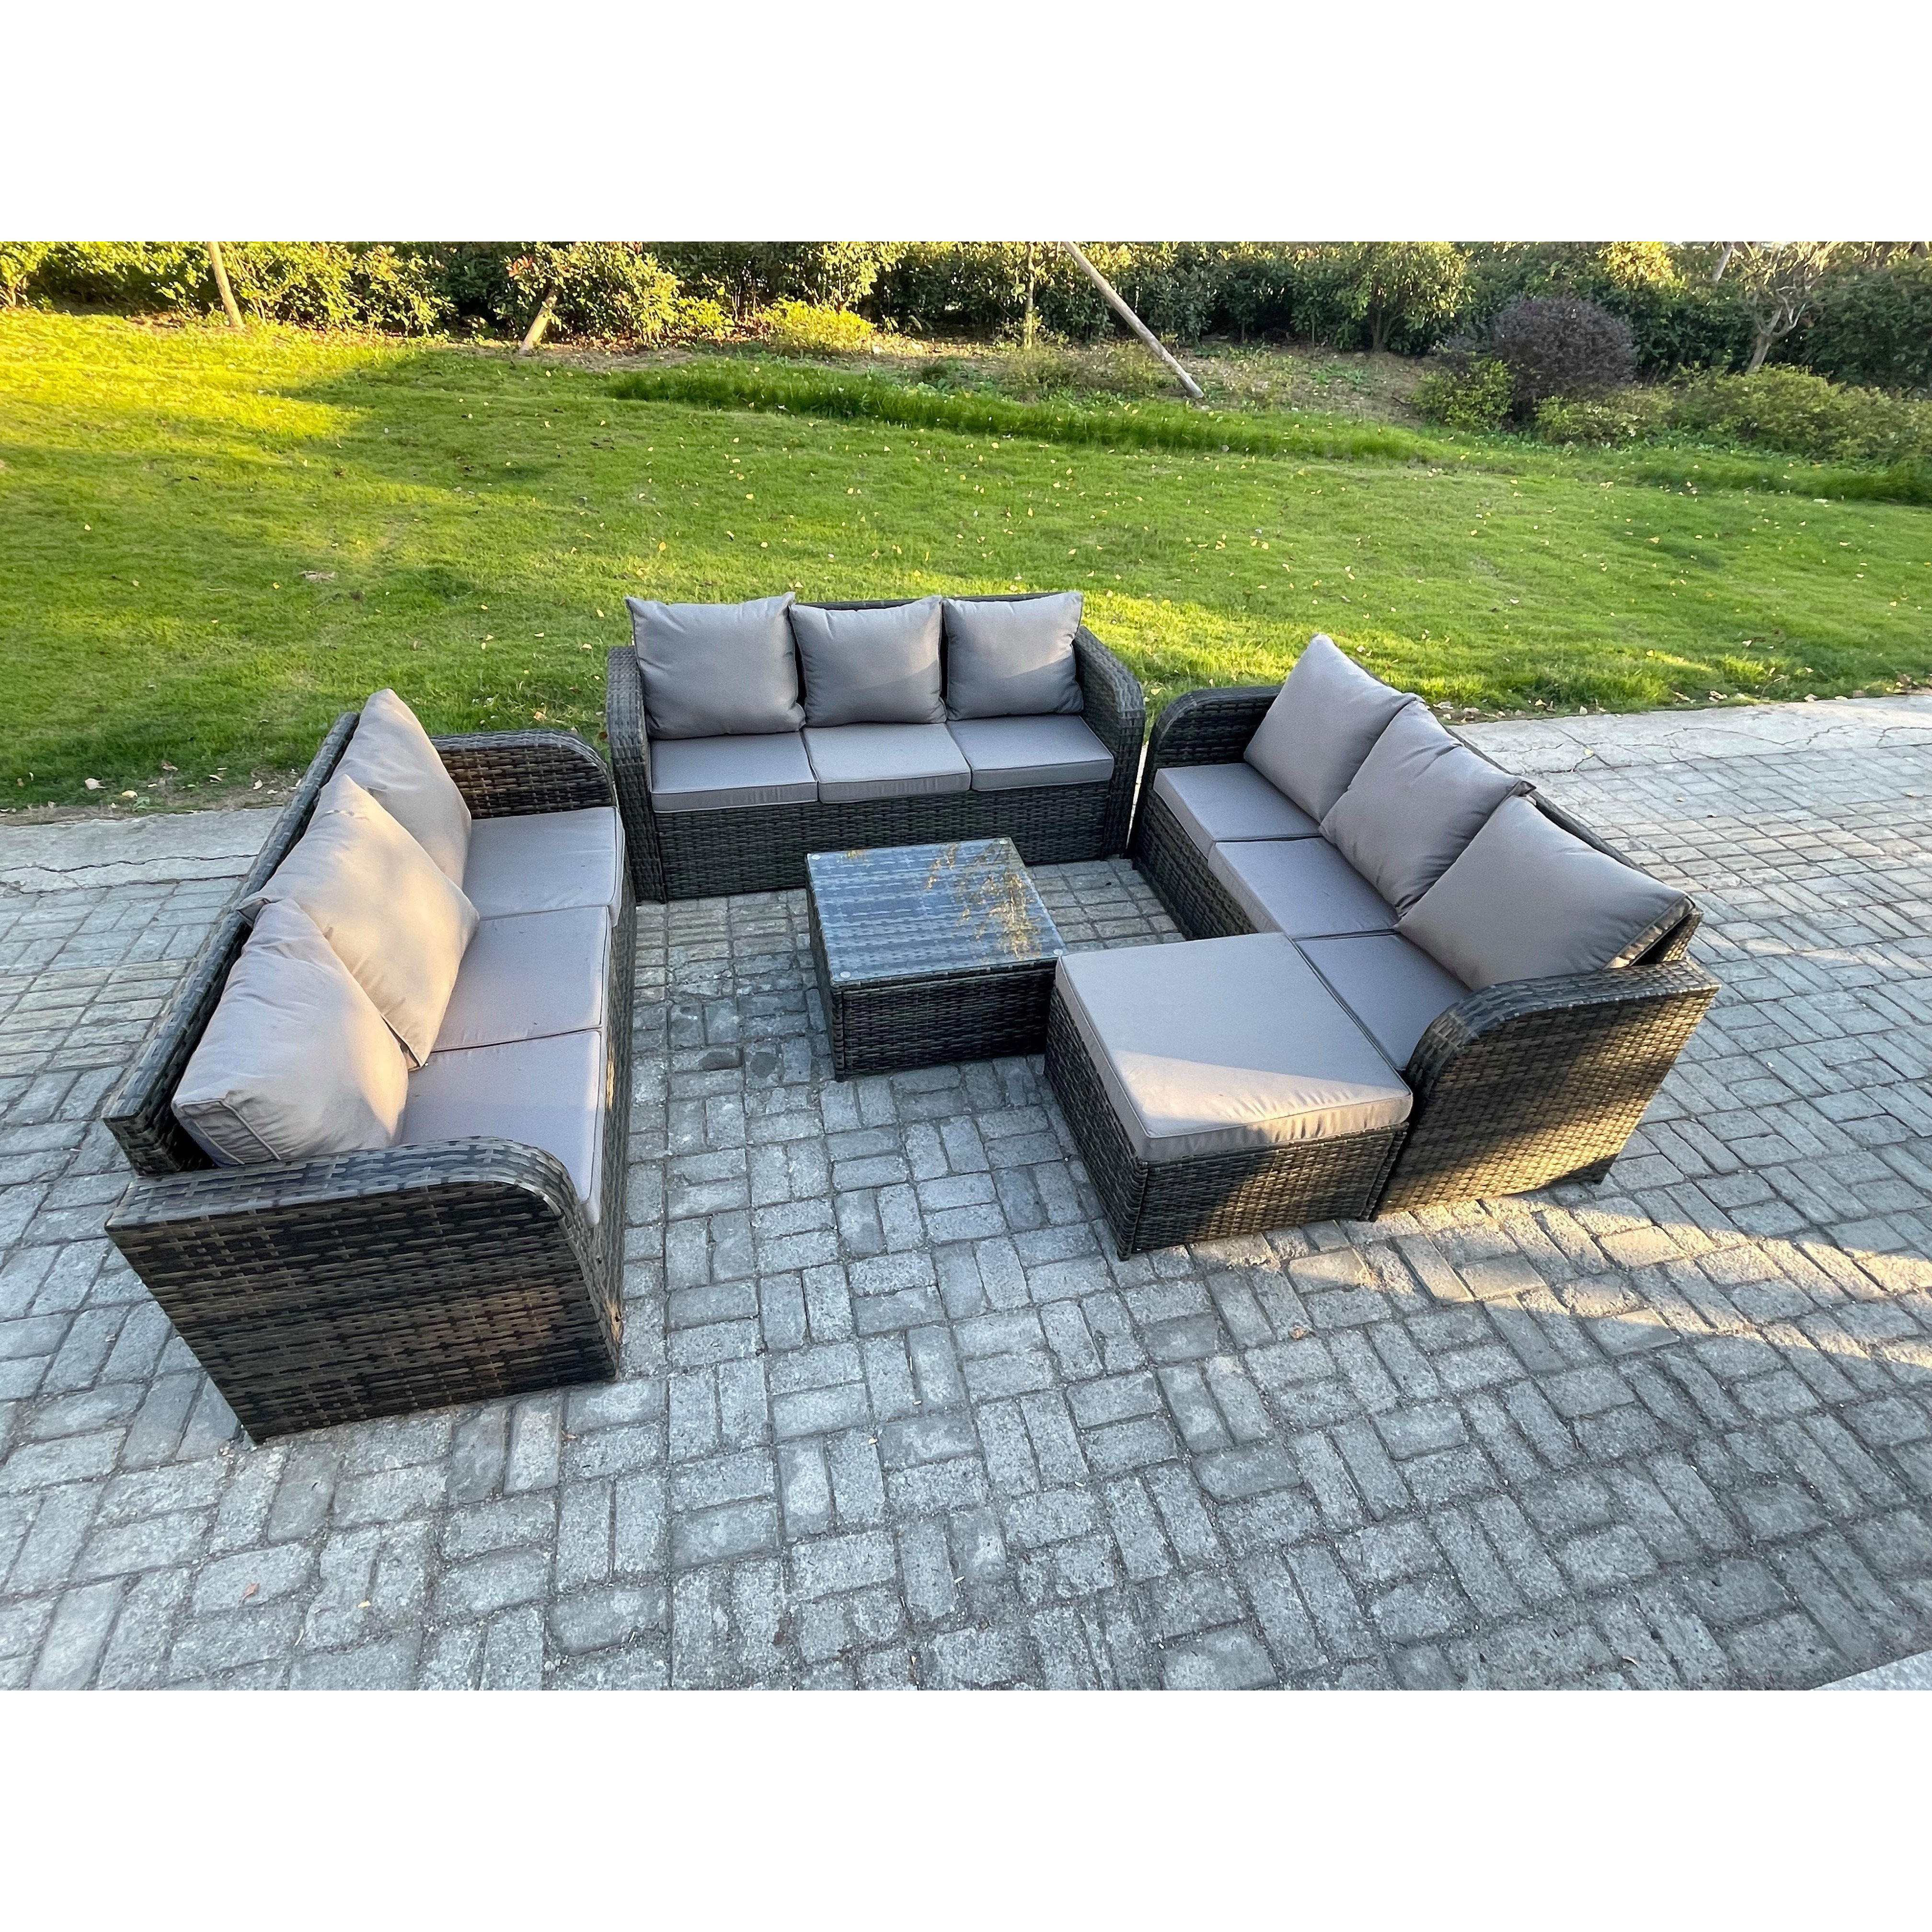 Patio Garden Furniture Sets Wicker 10 Seater Outdoor Rattan Furniture Sofa Sets with Square Coffee Table Big Footstool - image 1